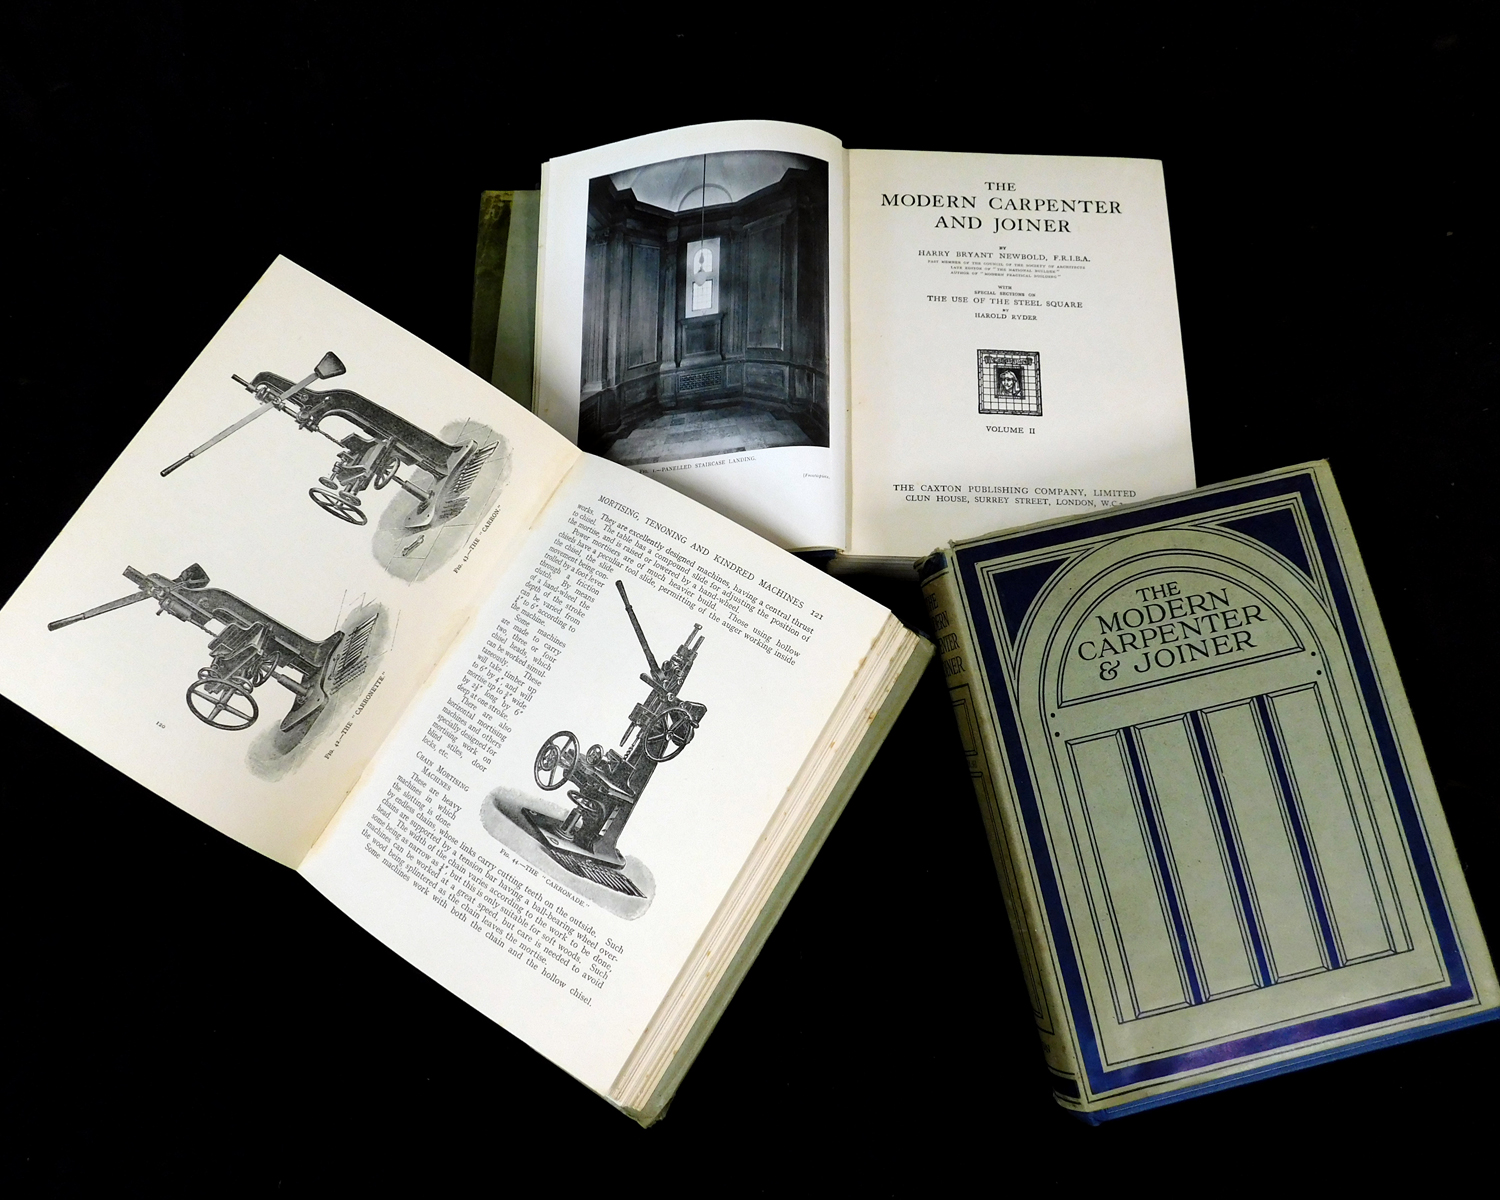 HARRY BRYANT NEWBOLD: THE MODERN CARPENTER AND JOINER, London, Caxton Publishing Co [1926], 1st